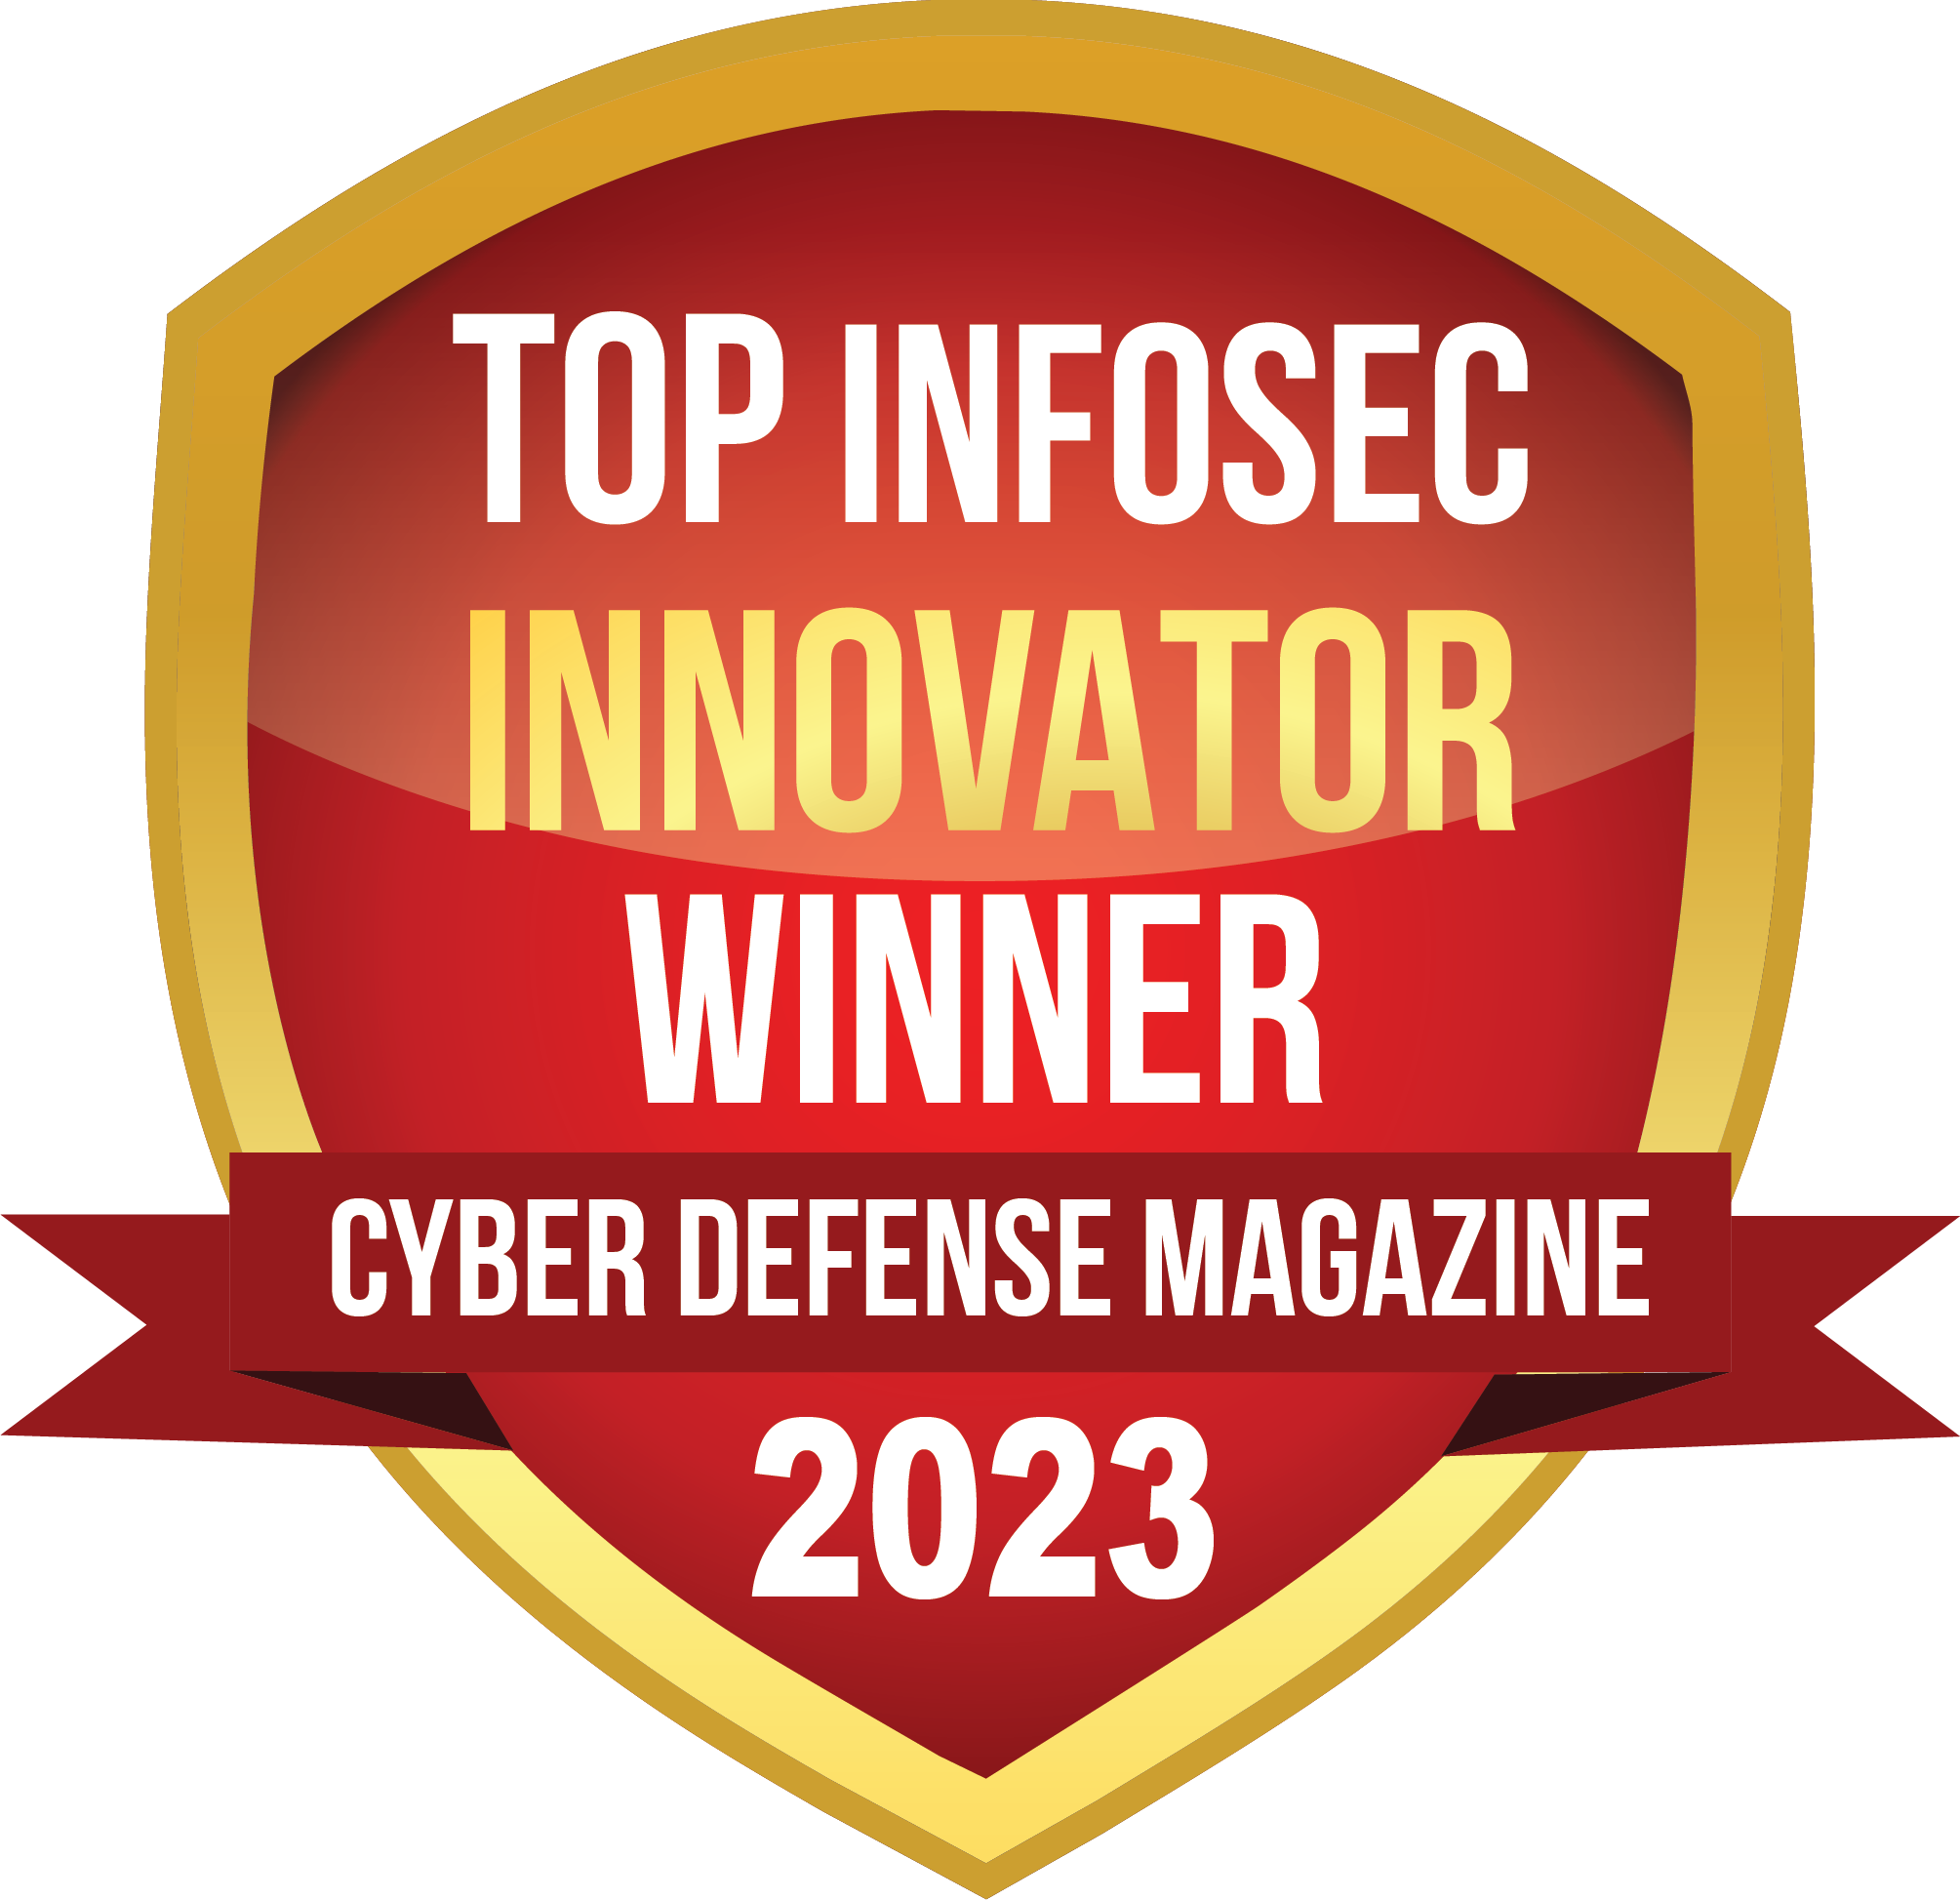 Gradient Cyber Named Top InfoSec Innovator 2023 Award Winner for its Managed Extended Detection and Response (MXDR) Solution